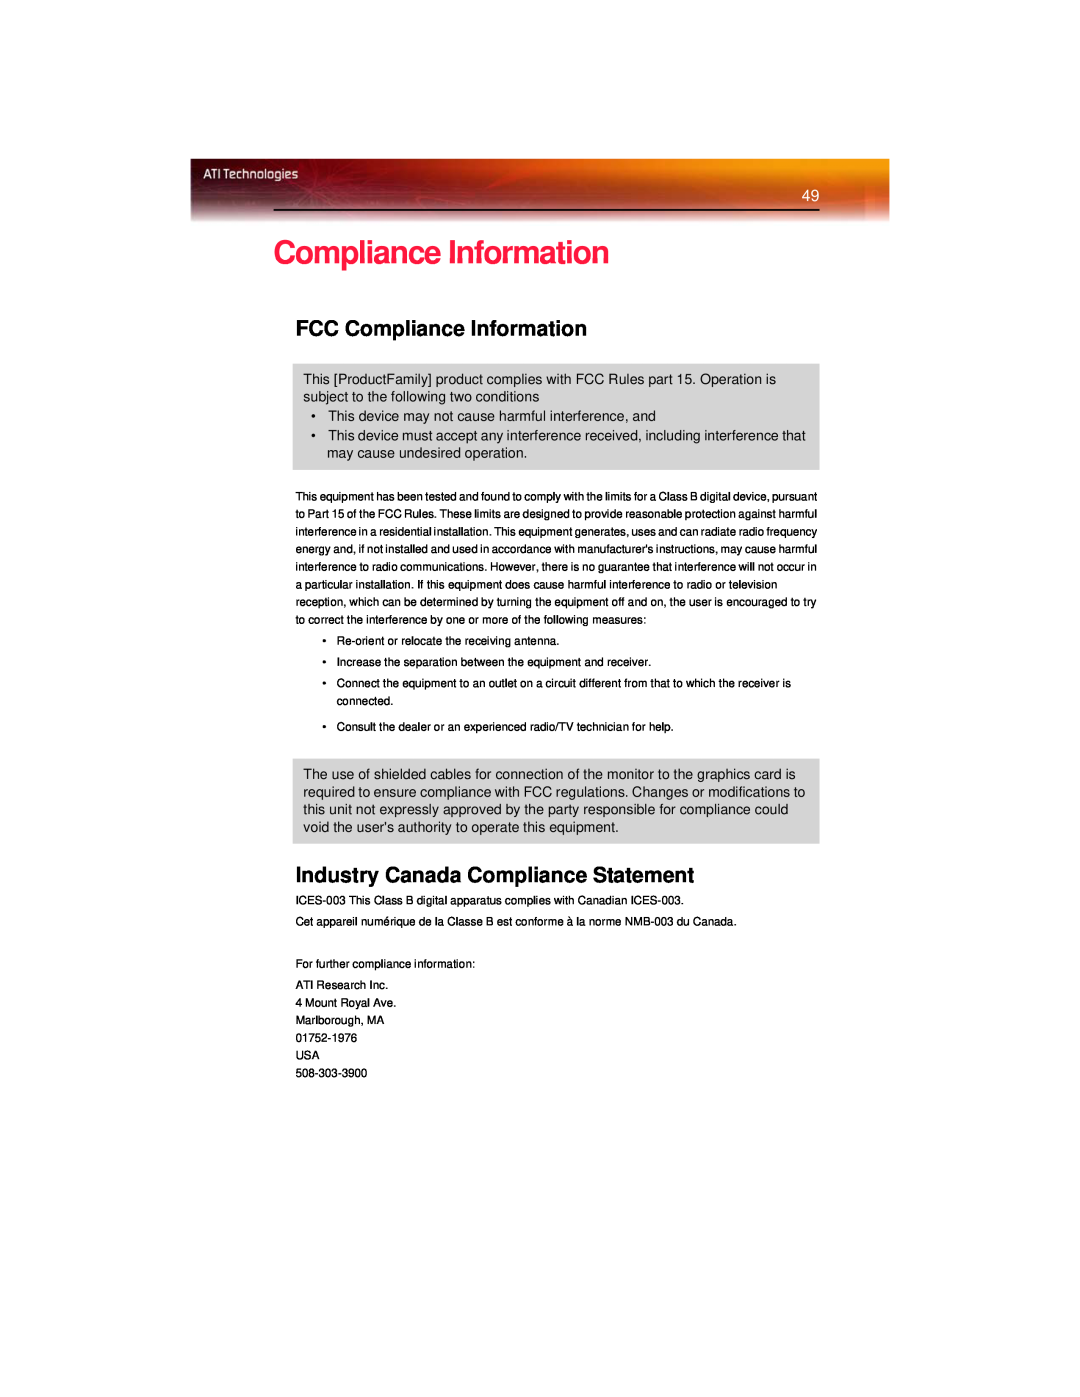 ATI Technologies X600 manual FCC Compliance Information, Industry Canada Compliance Statement 